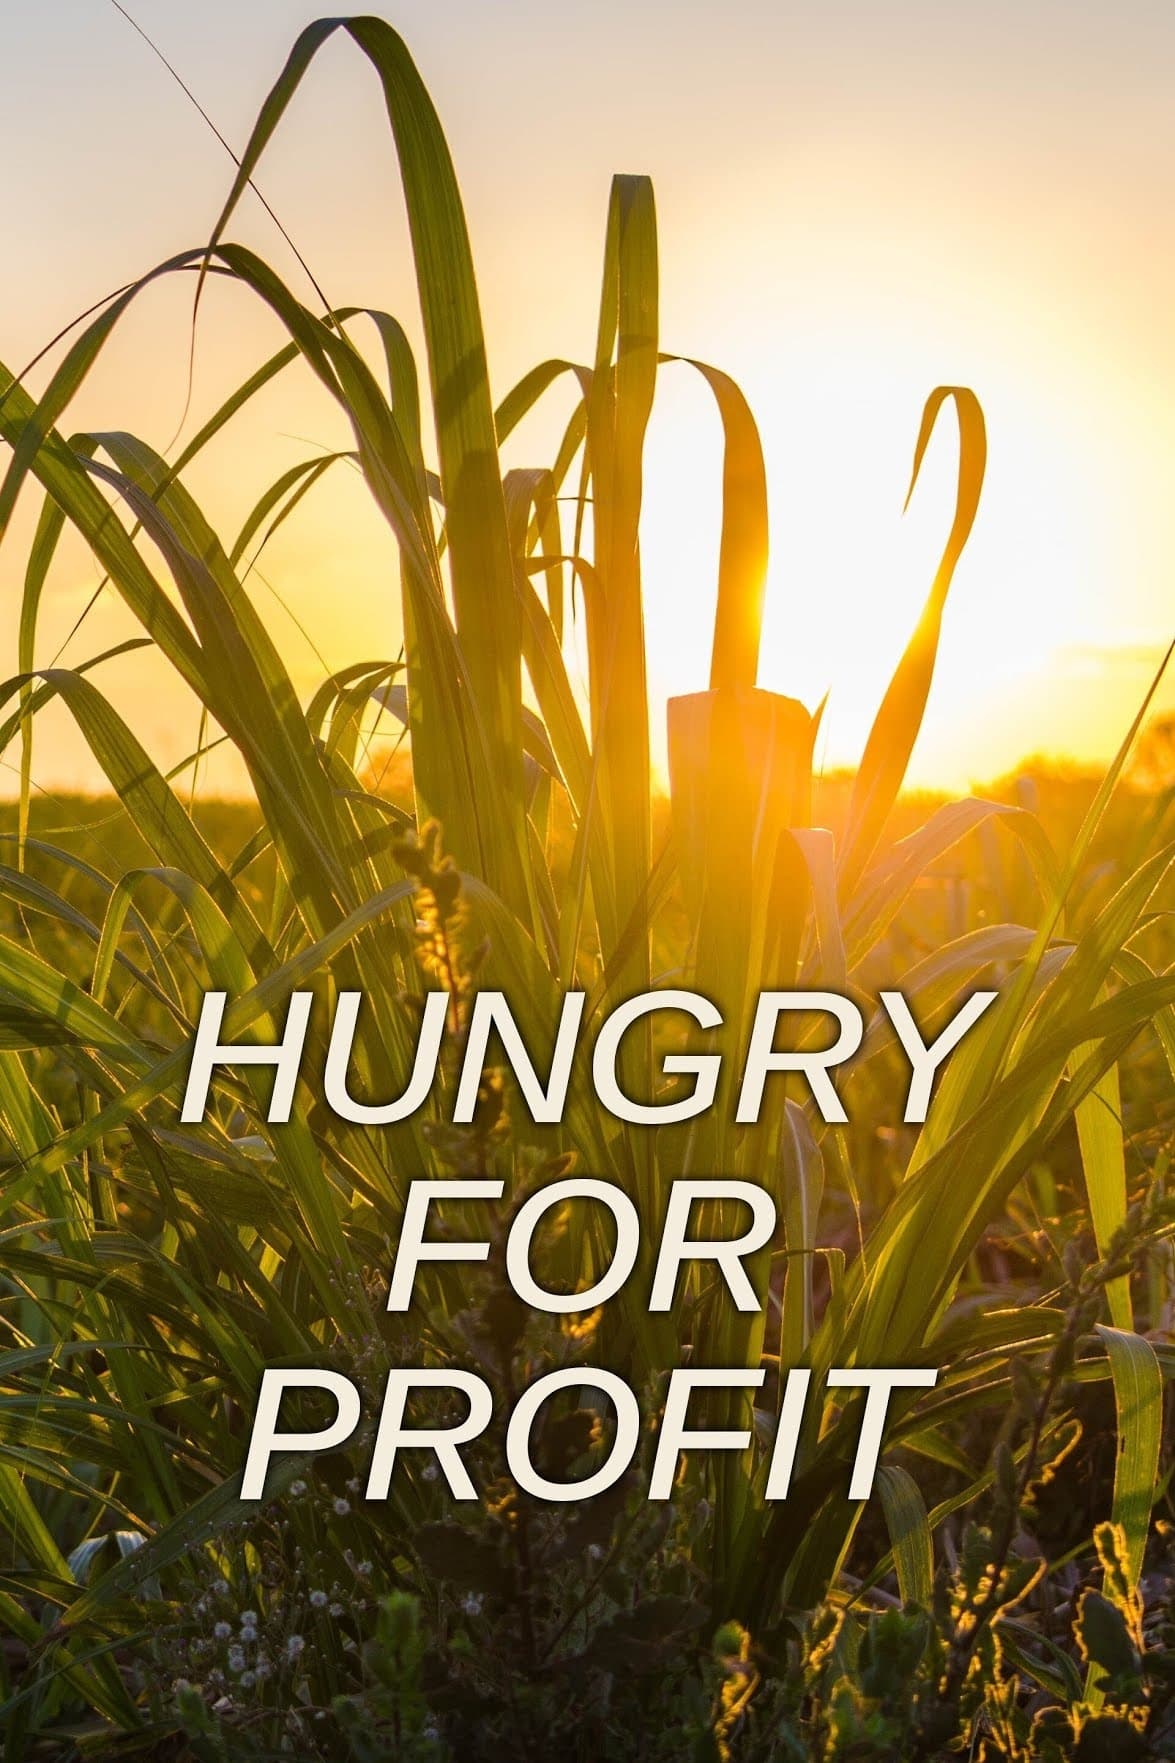 Hungry for Profit